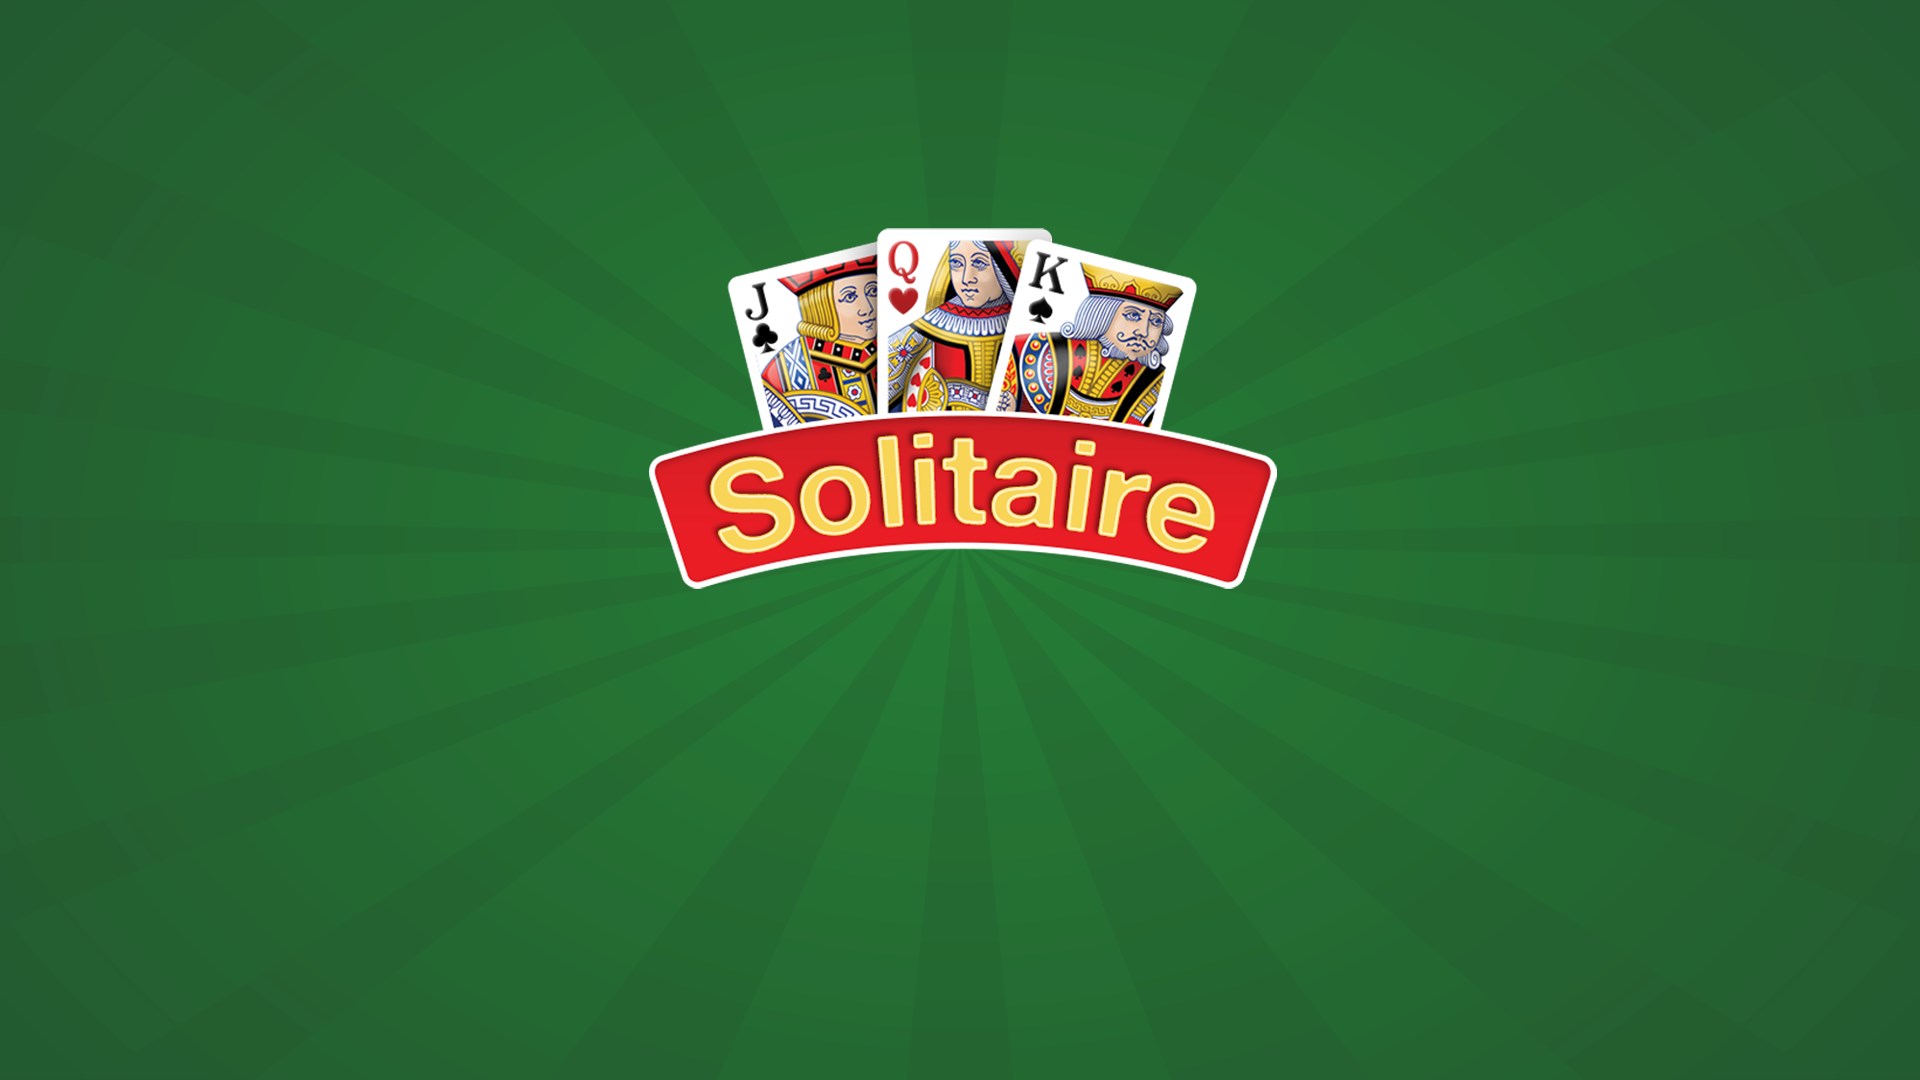 Download solitaire for windows 7 32 bit